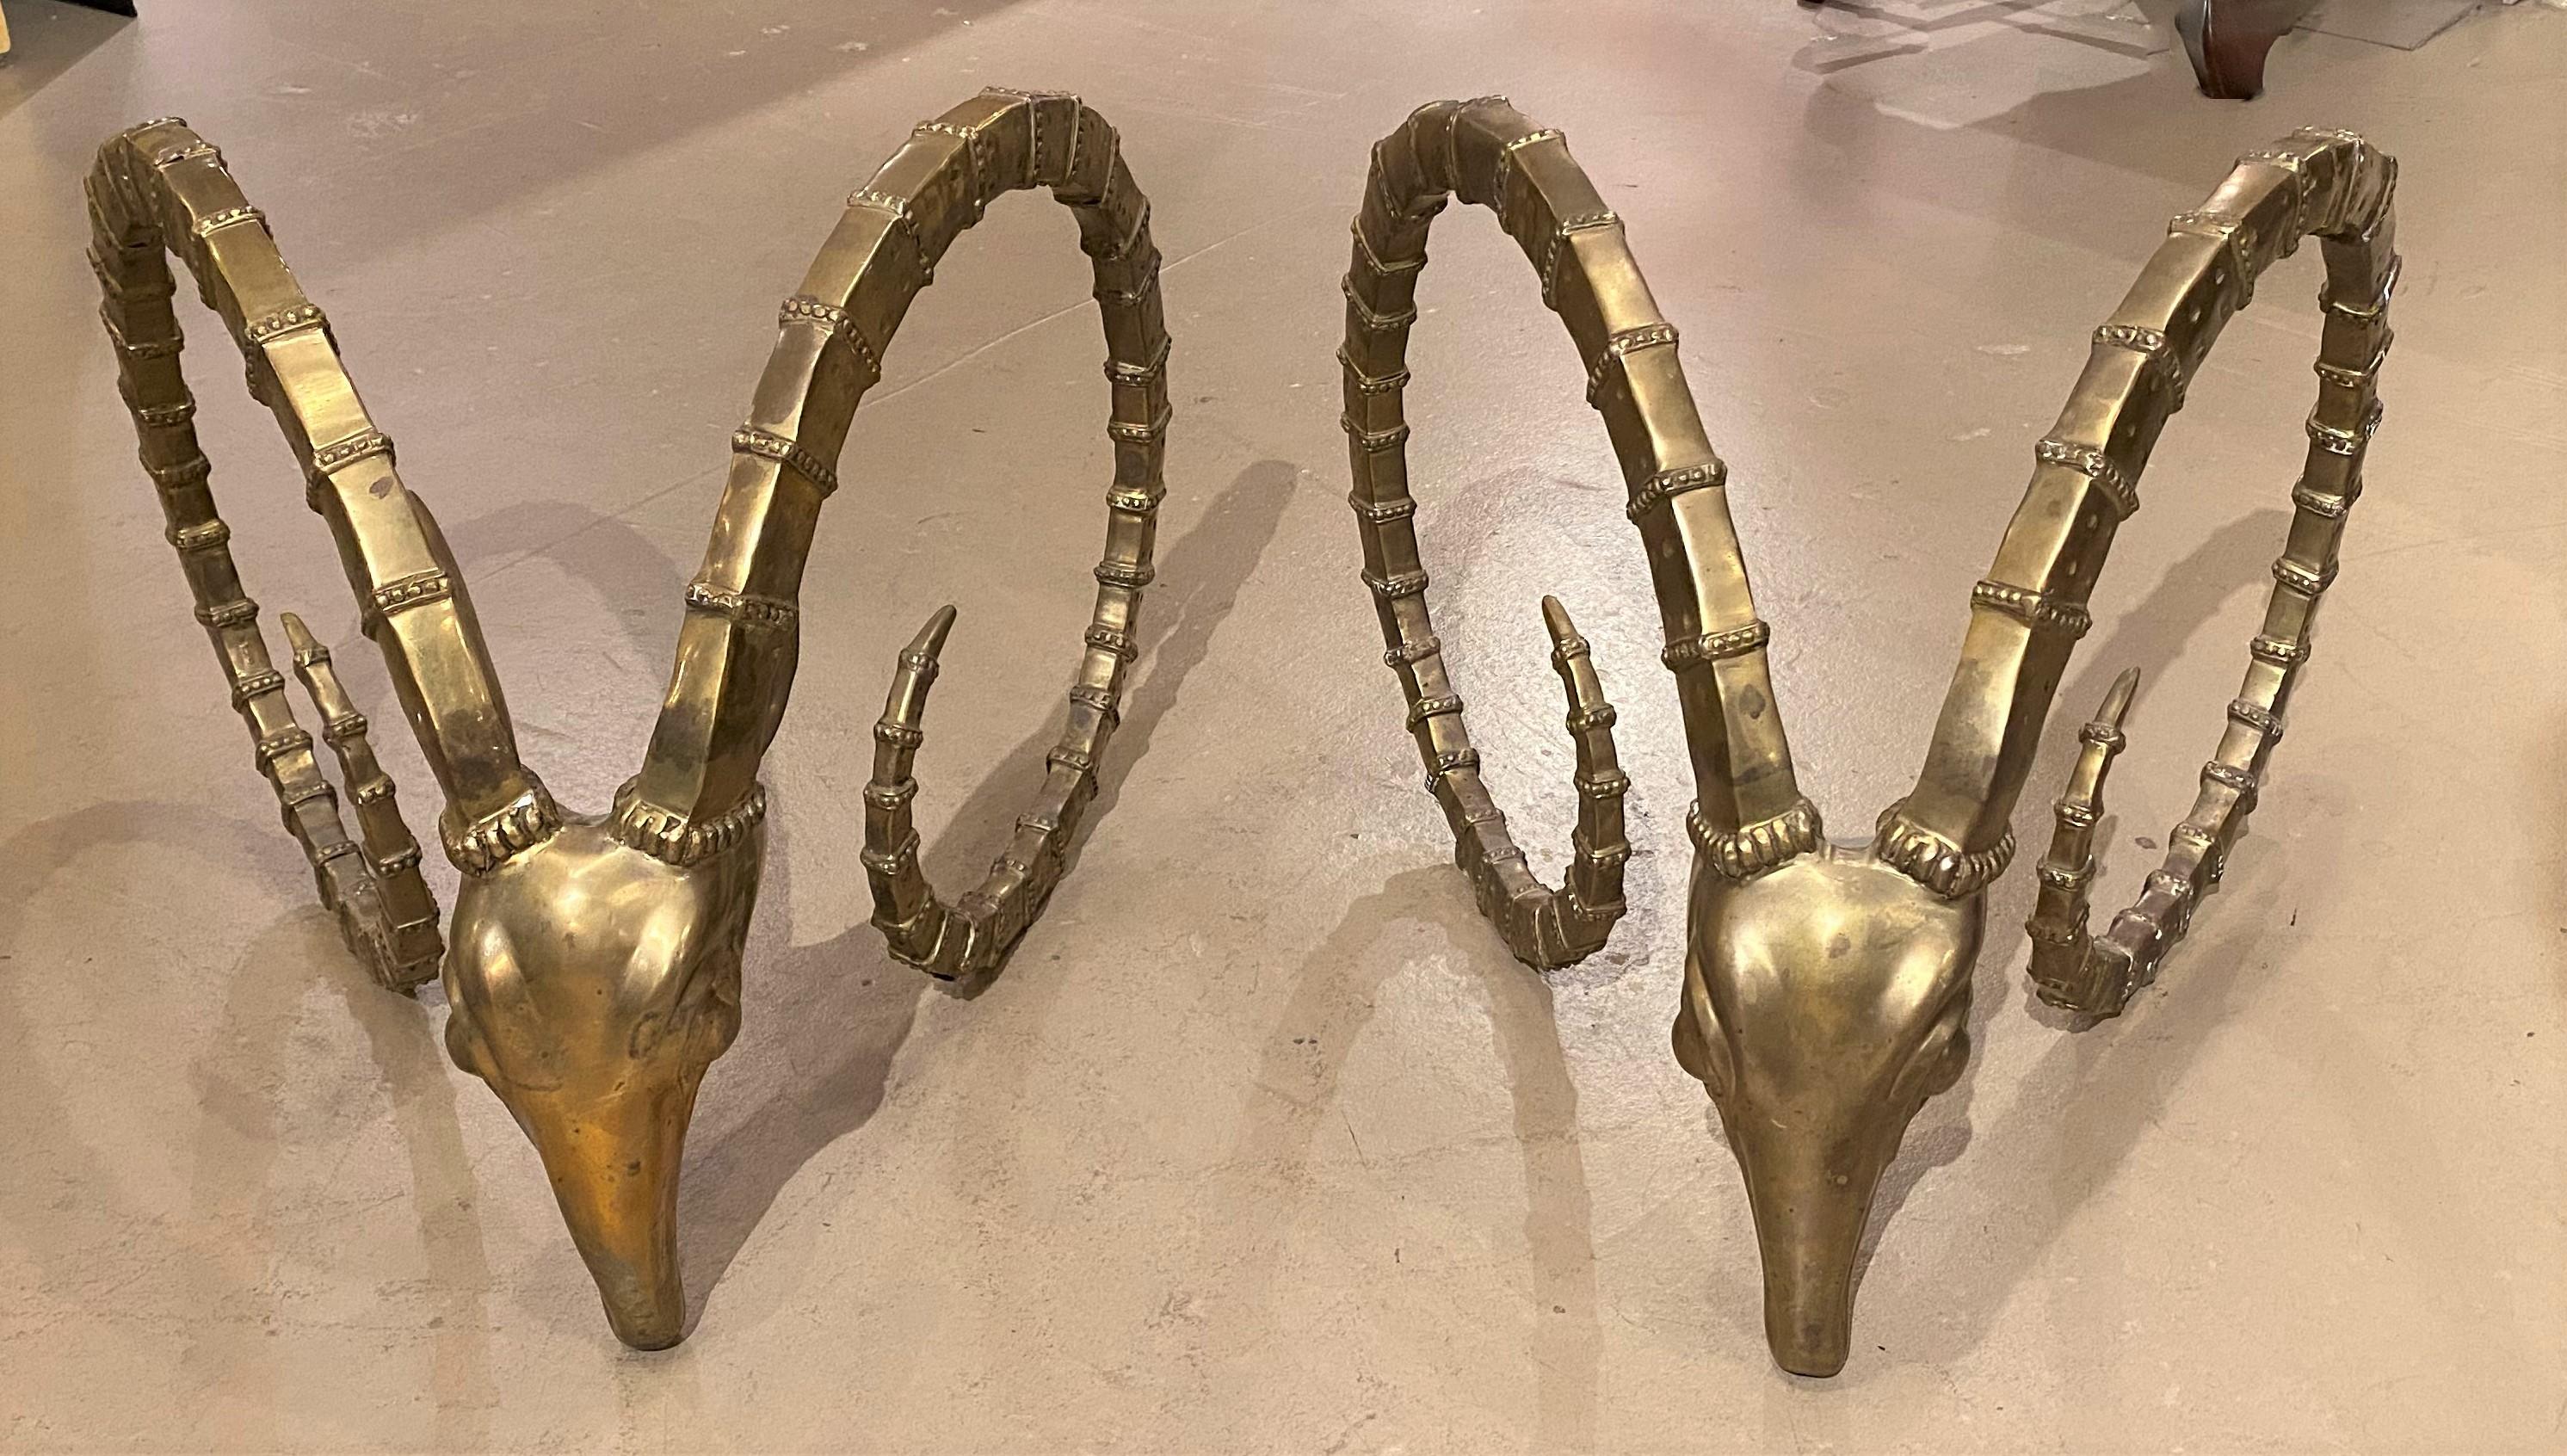 A fine pair of brass ram’s heads in the Ibex style of designer Alain Chervet, most likely used as a table base for a glass top table. This pair is unsigned, dating to the 1970s, in very good condition, with great patina and minor surface wear